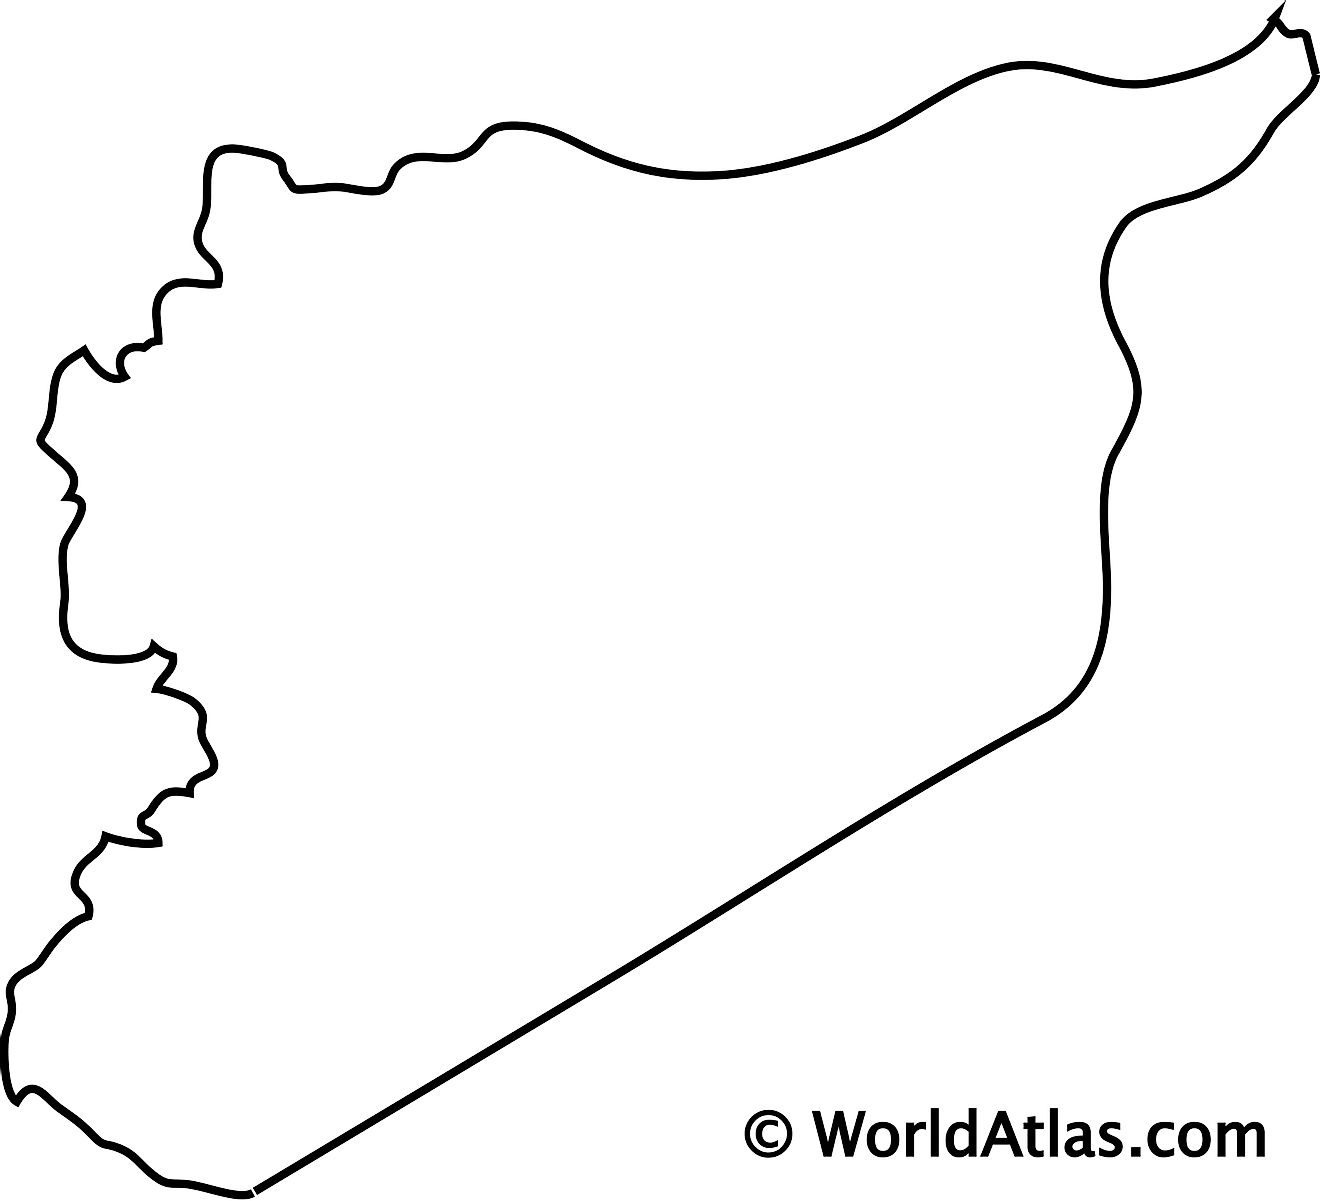 Blank Outline Map of Syria